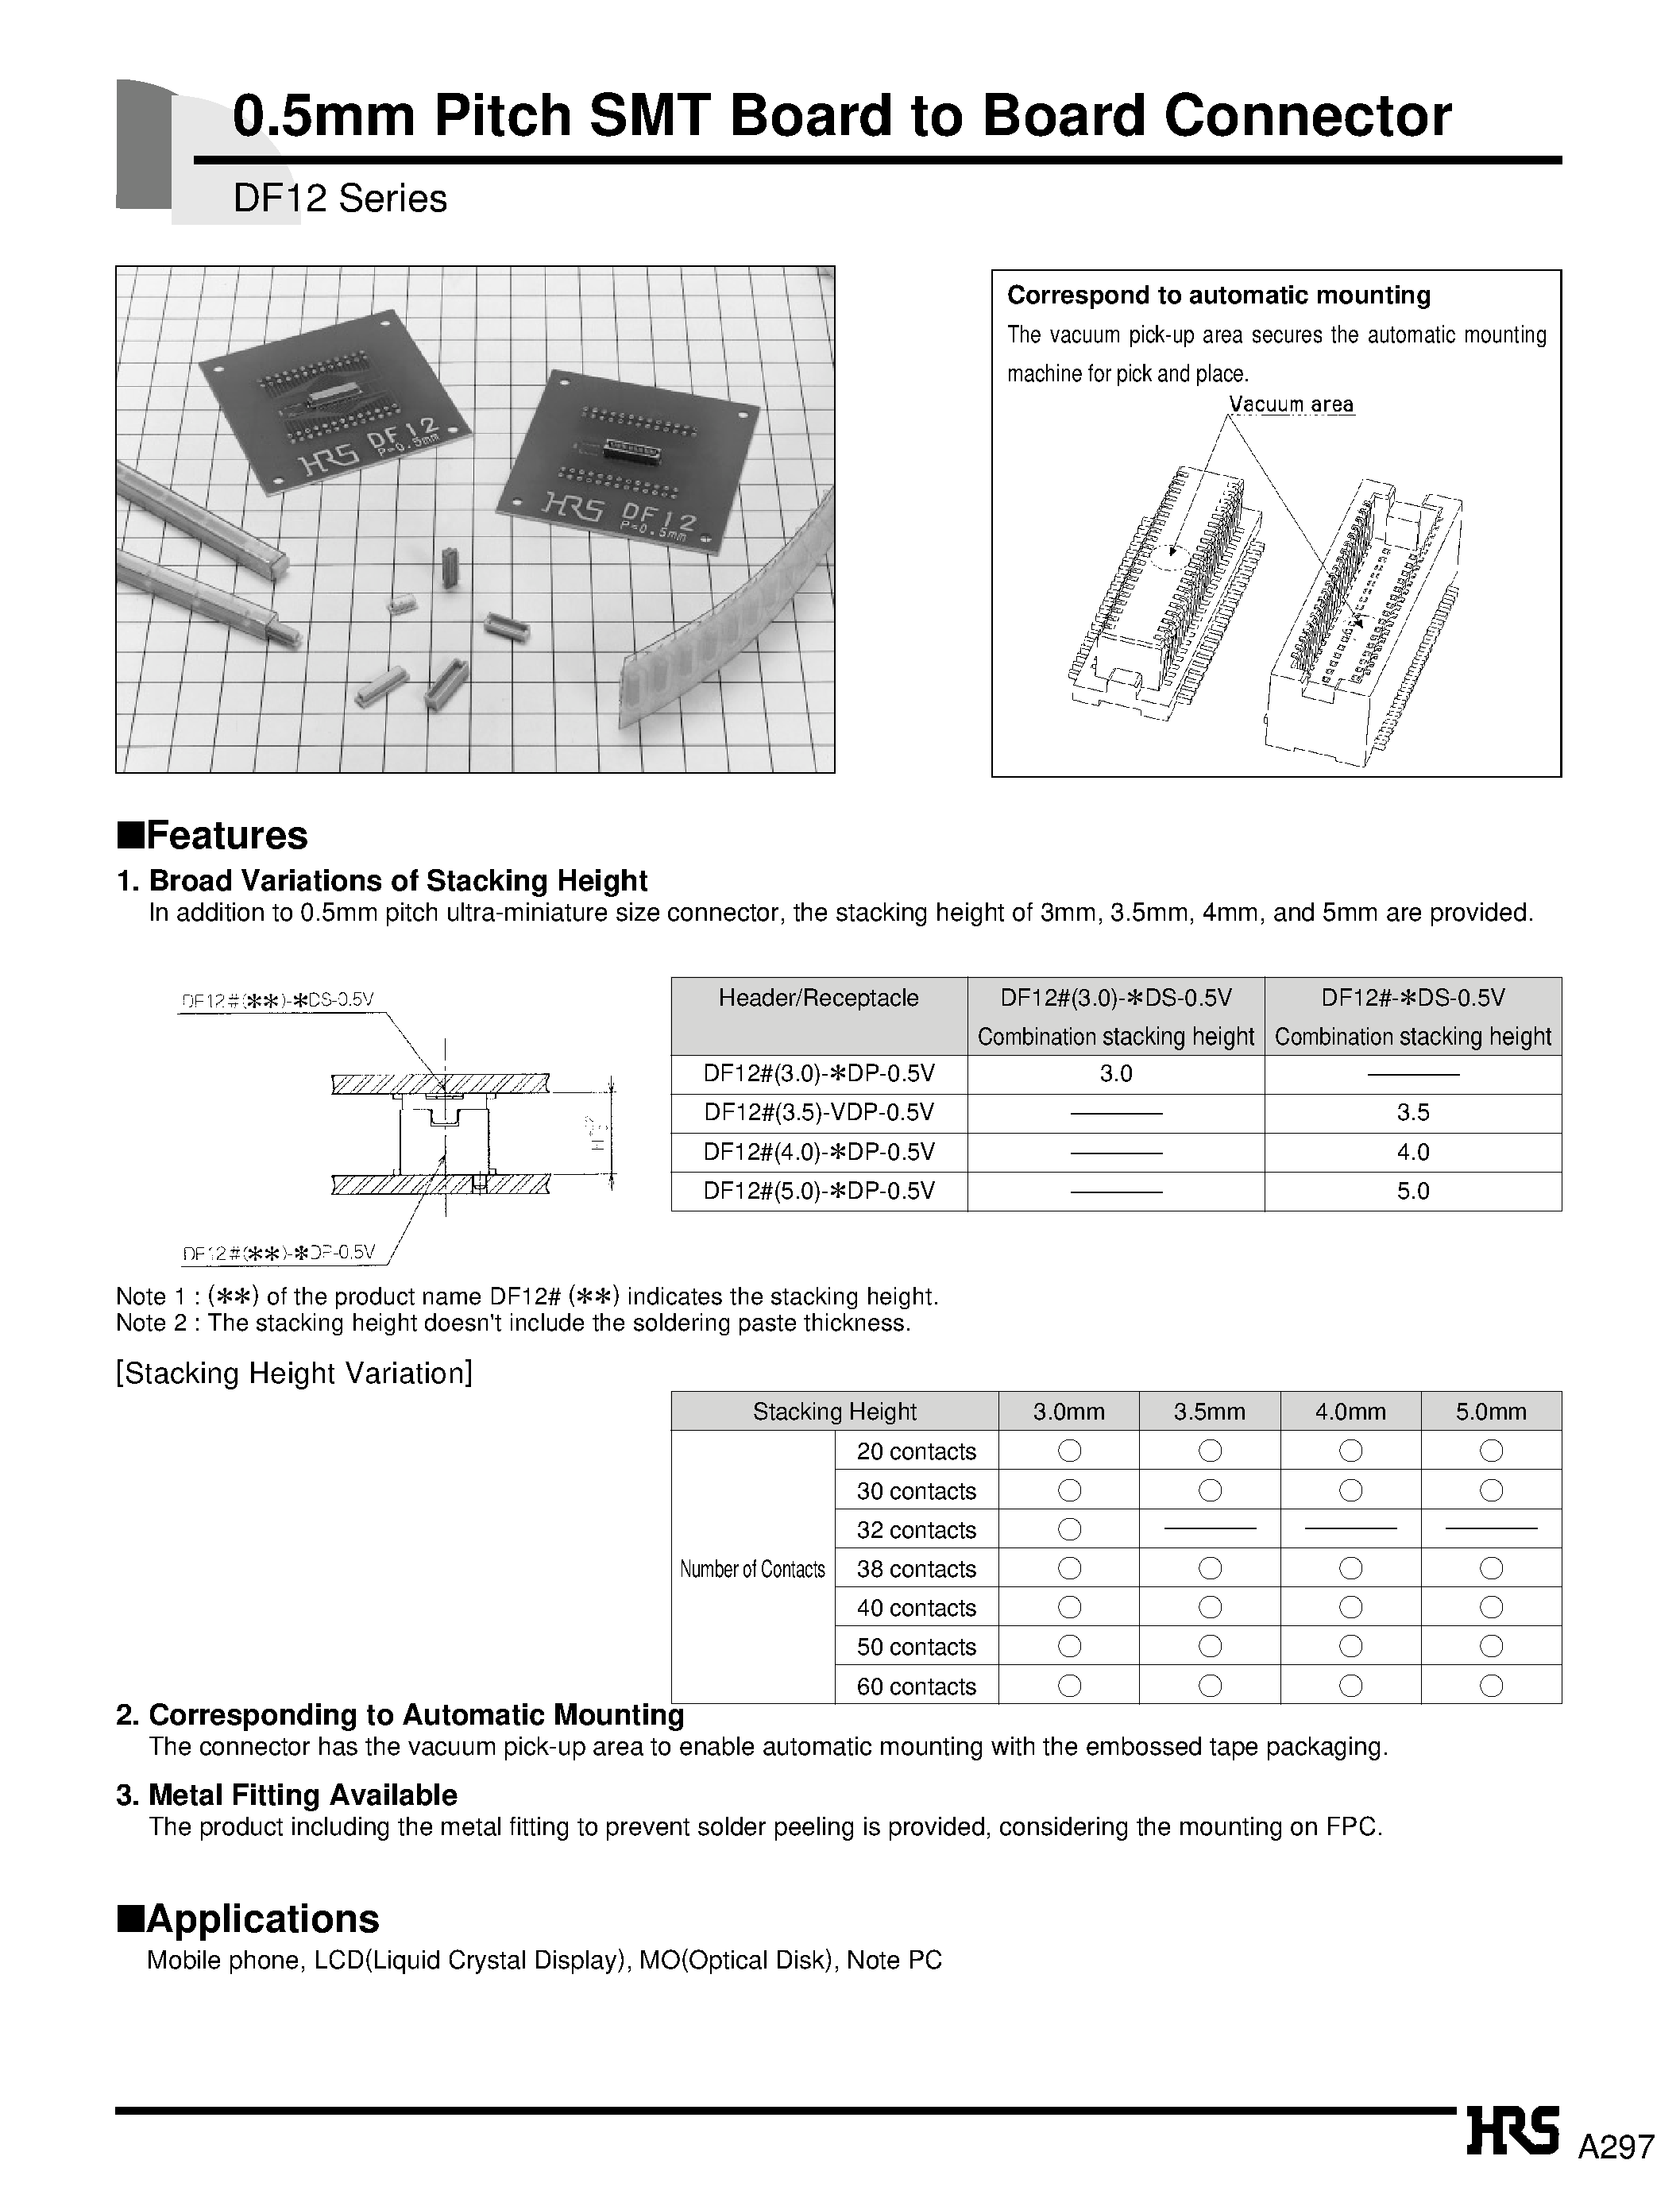 Datasheet DF12A-50DP-0.5V - 0.5mm Pitch SMT Board to Board Connector page 1